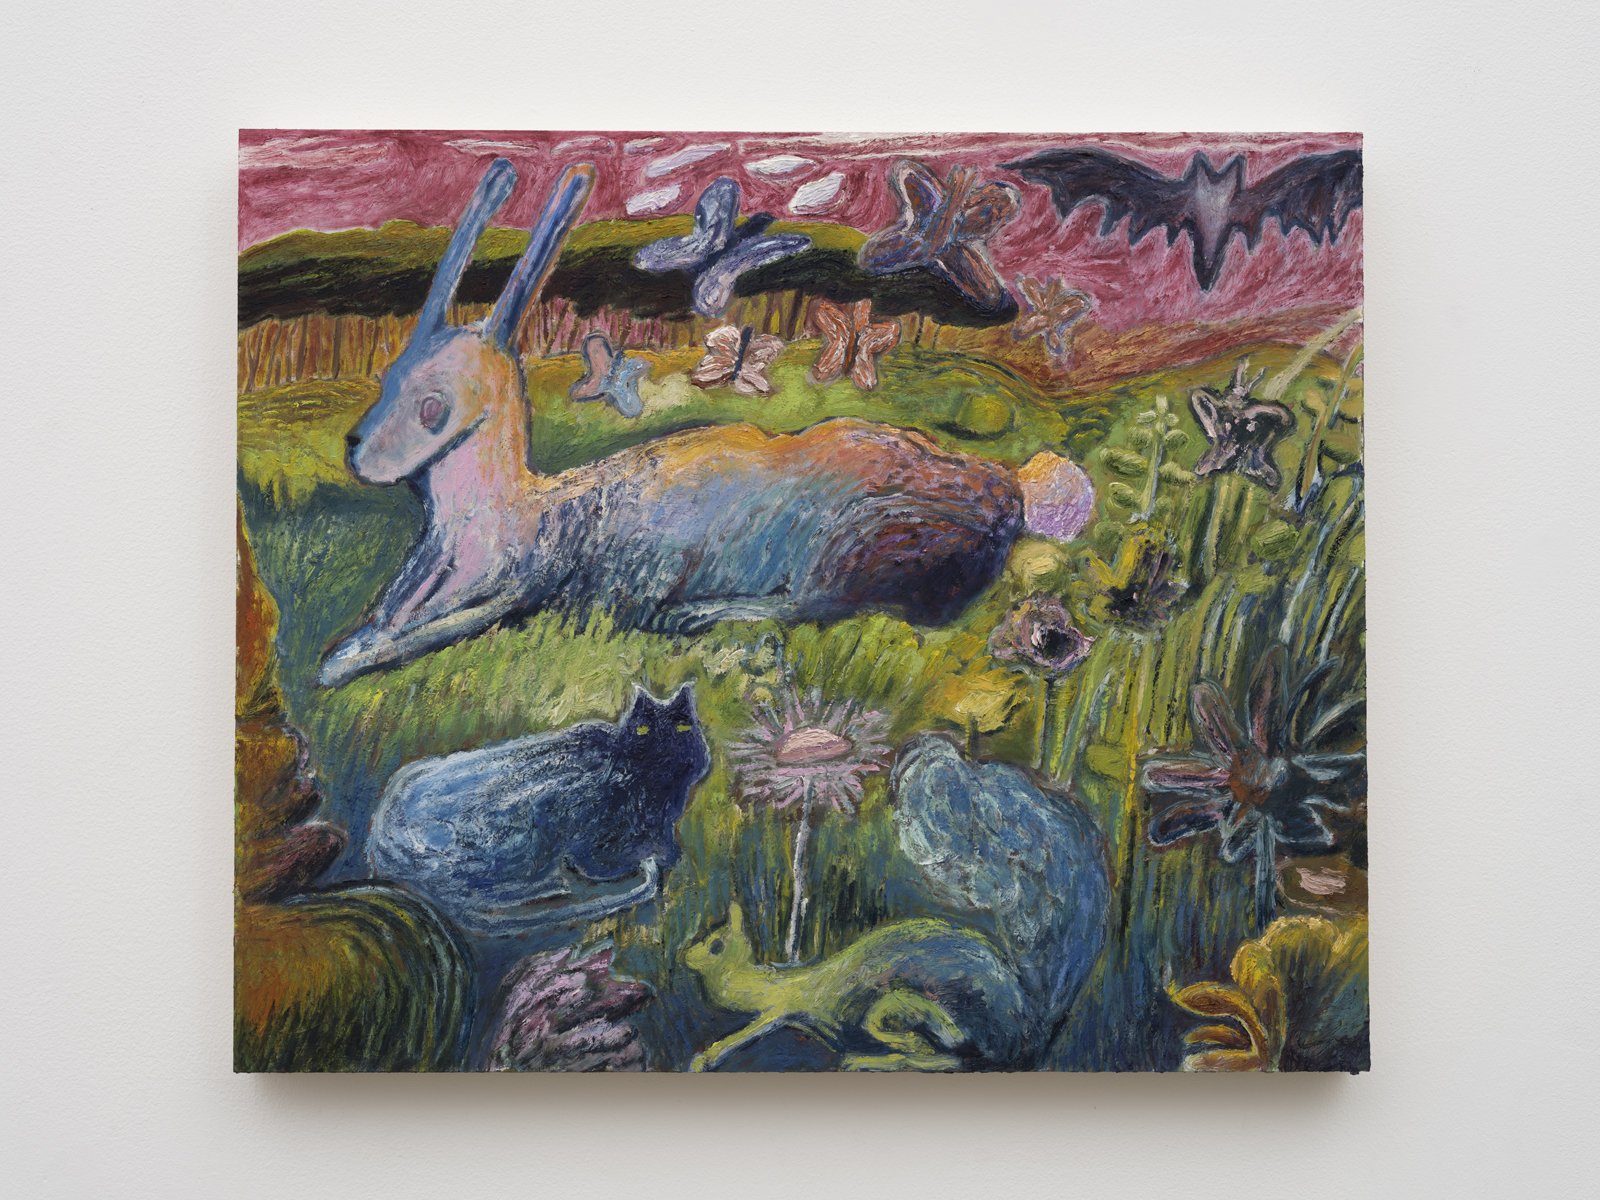  Raymie Iadevaia  All the Living Things, 2022  Oil on wood panel  20 x 24 in. 